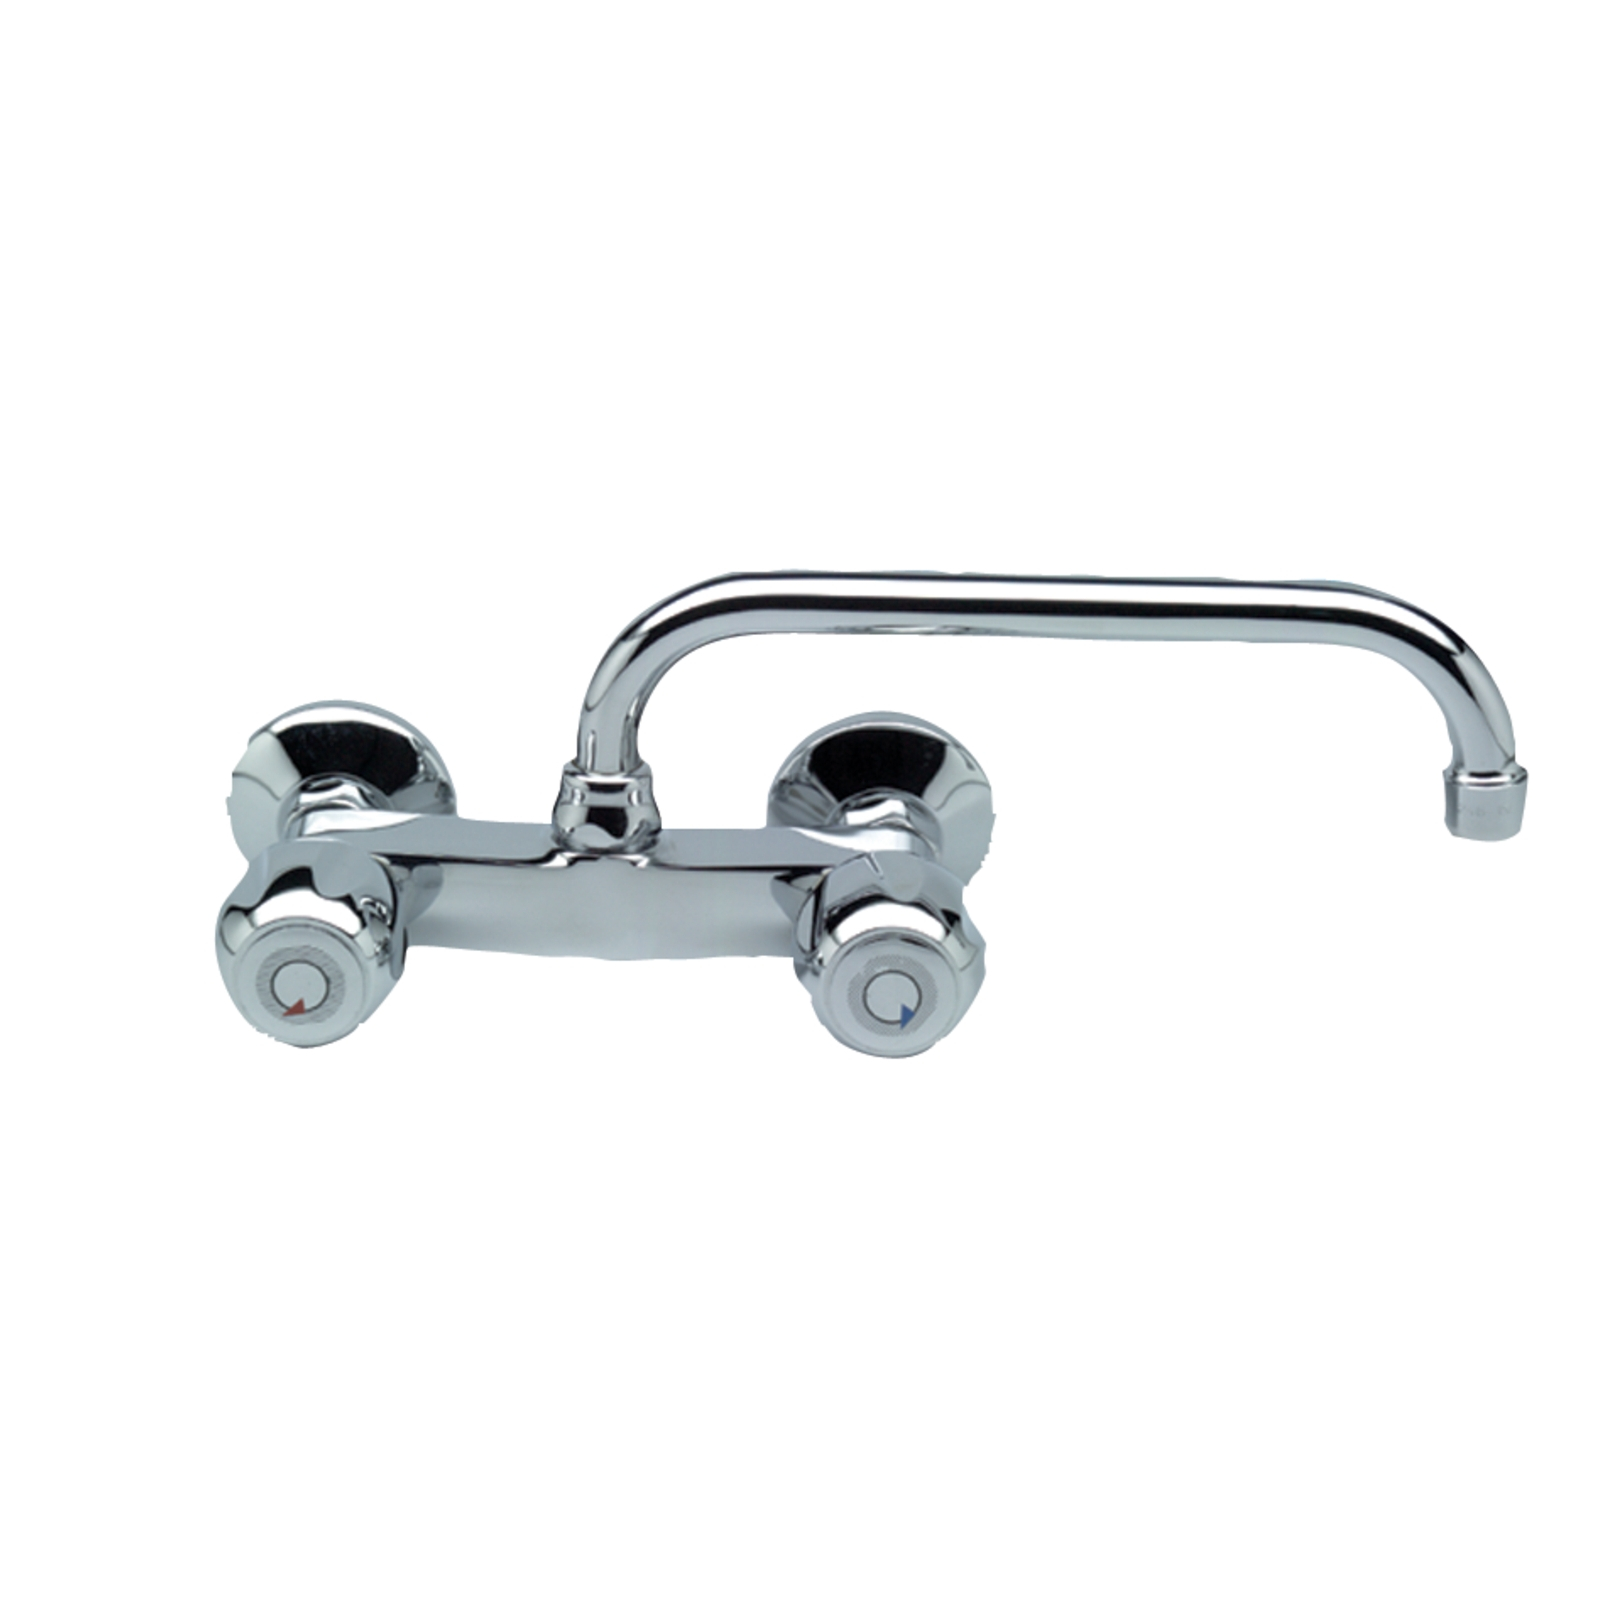 WALL SINK MIXER WITH OVER SWIVEL SPOUT